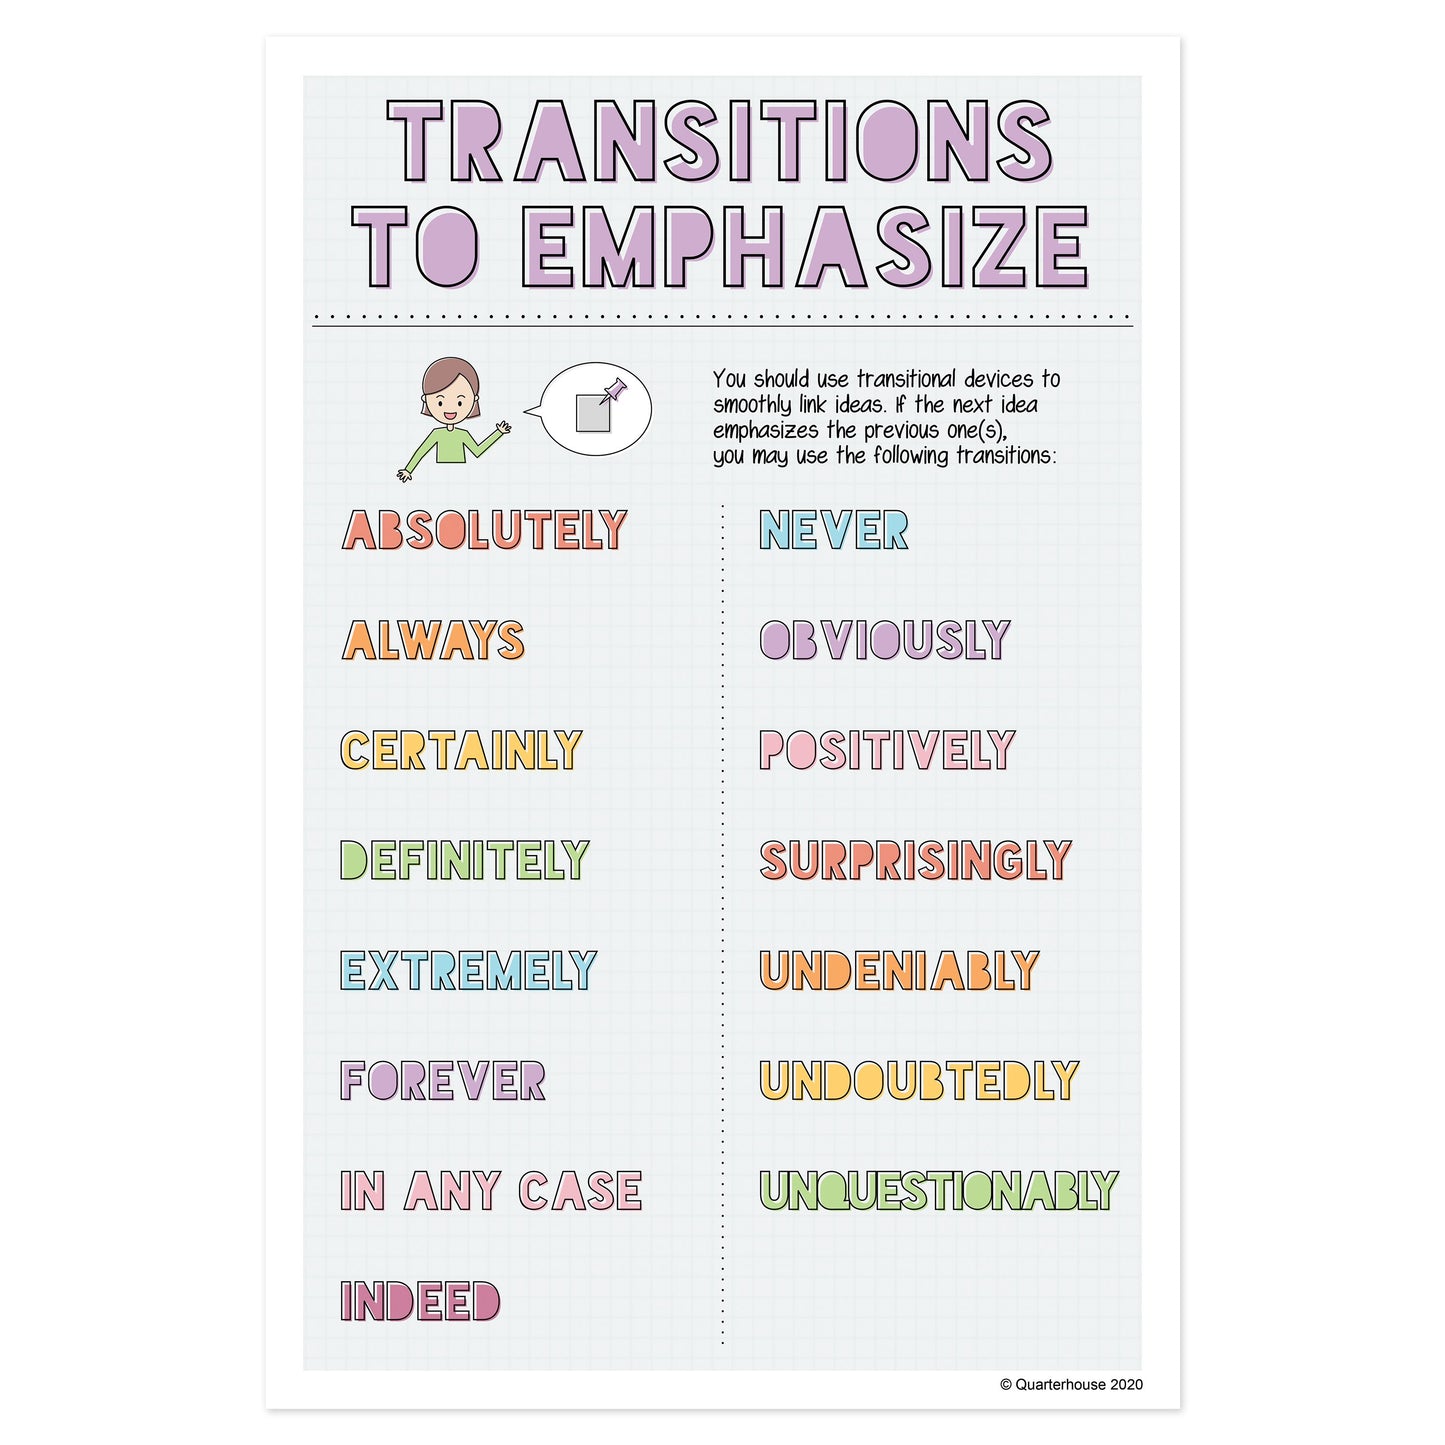 Quarterhouse Transitions to Emphasize Poster, English-Language Arts Classroom Materials for Teachers